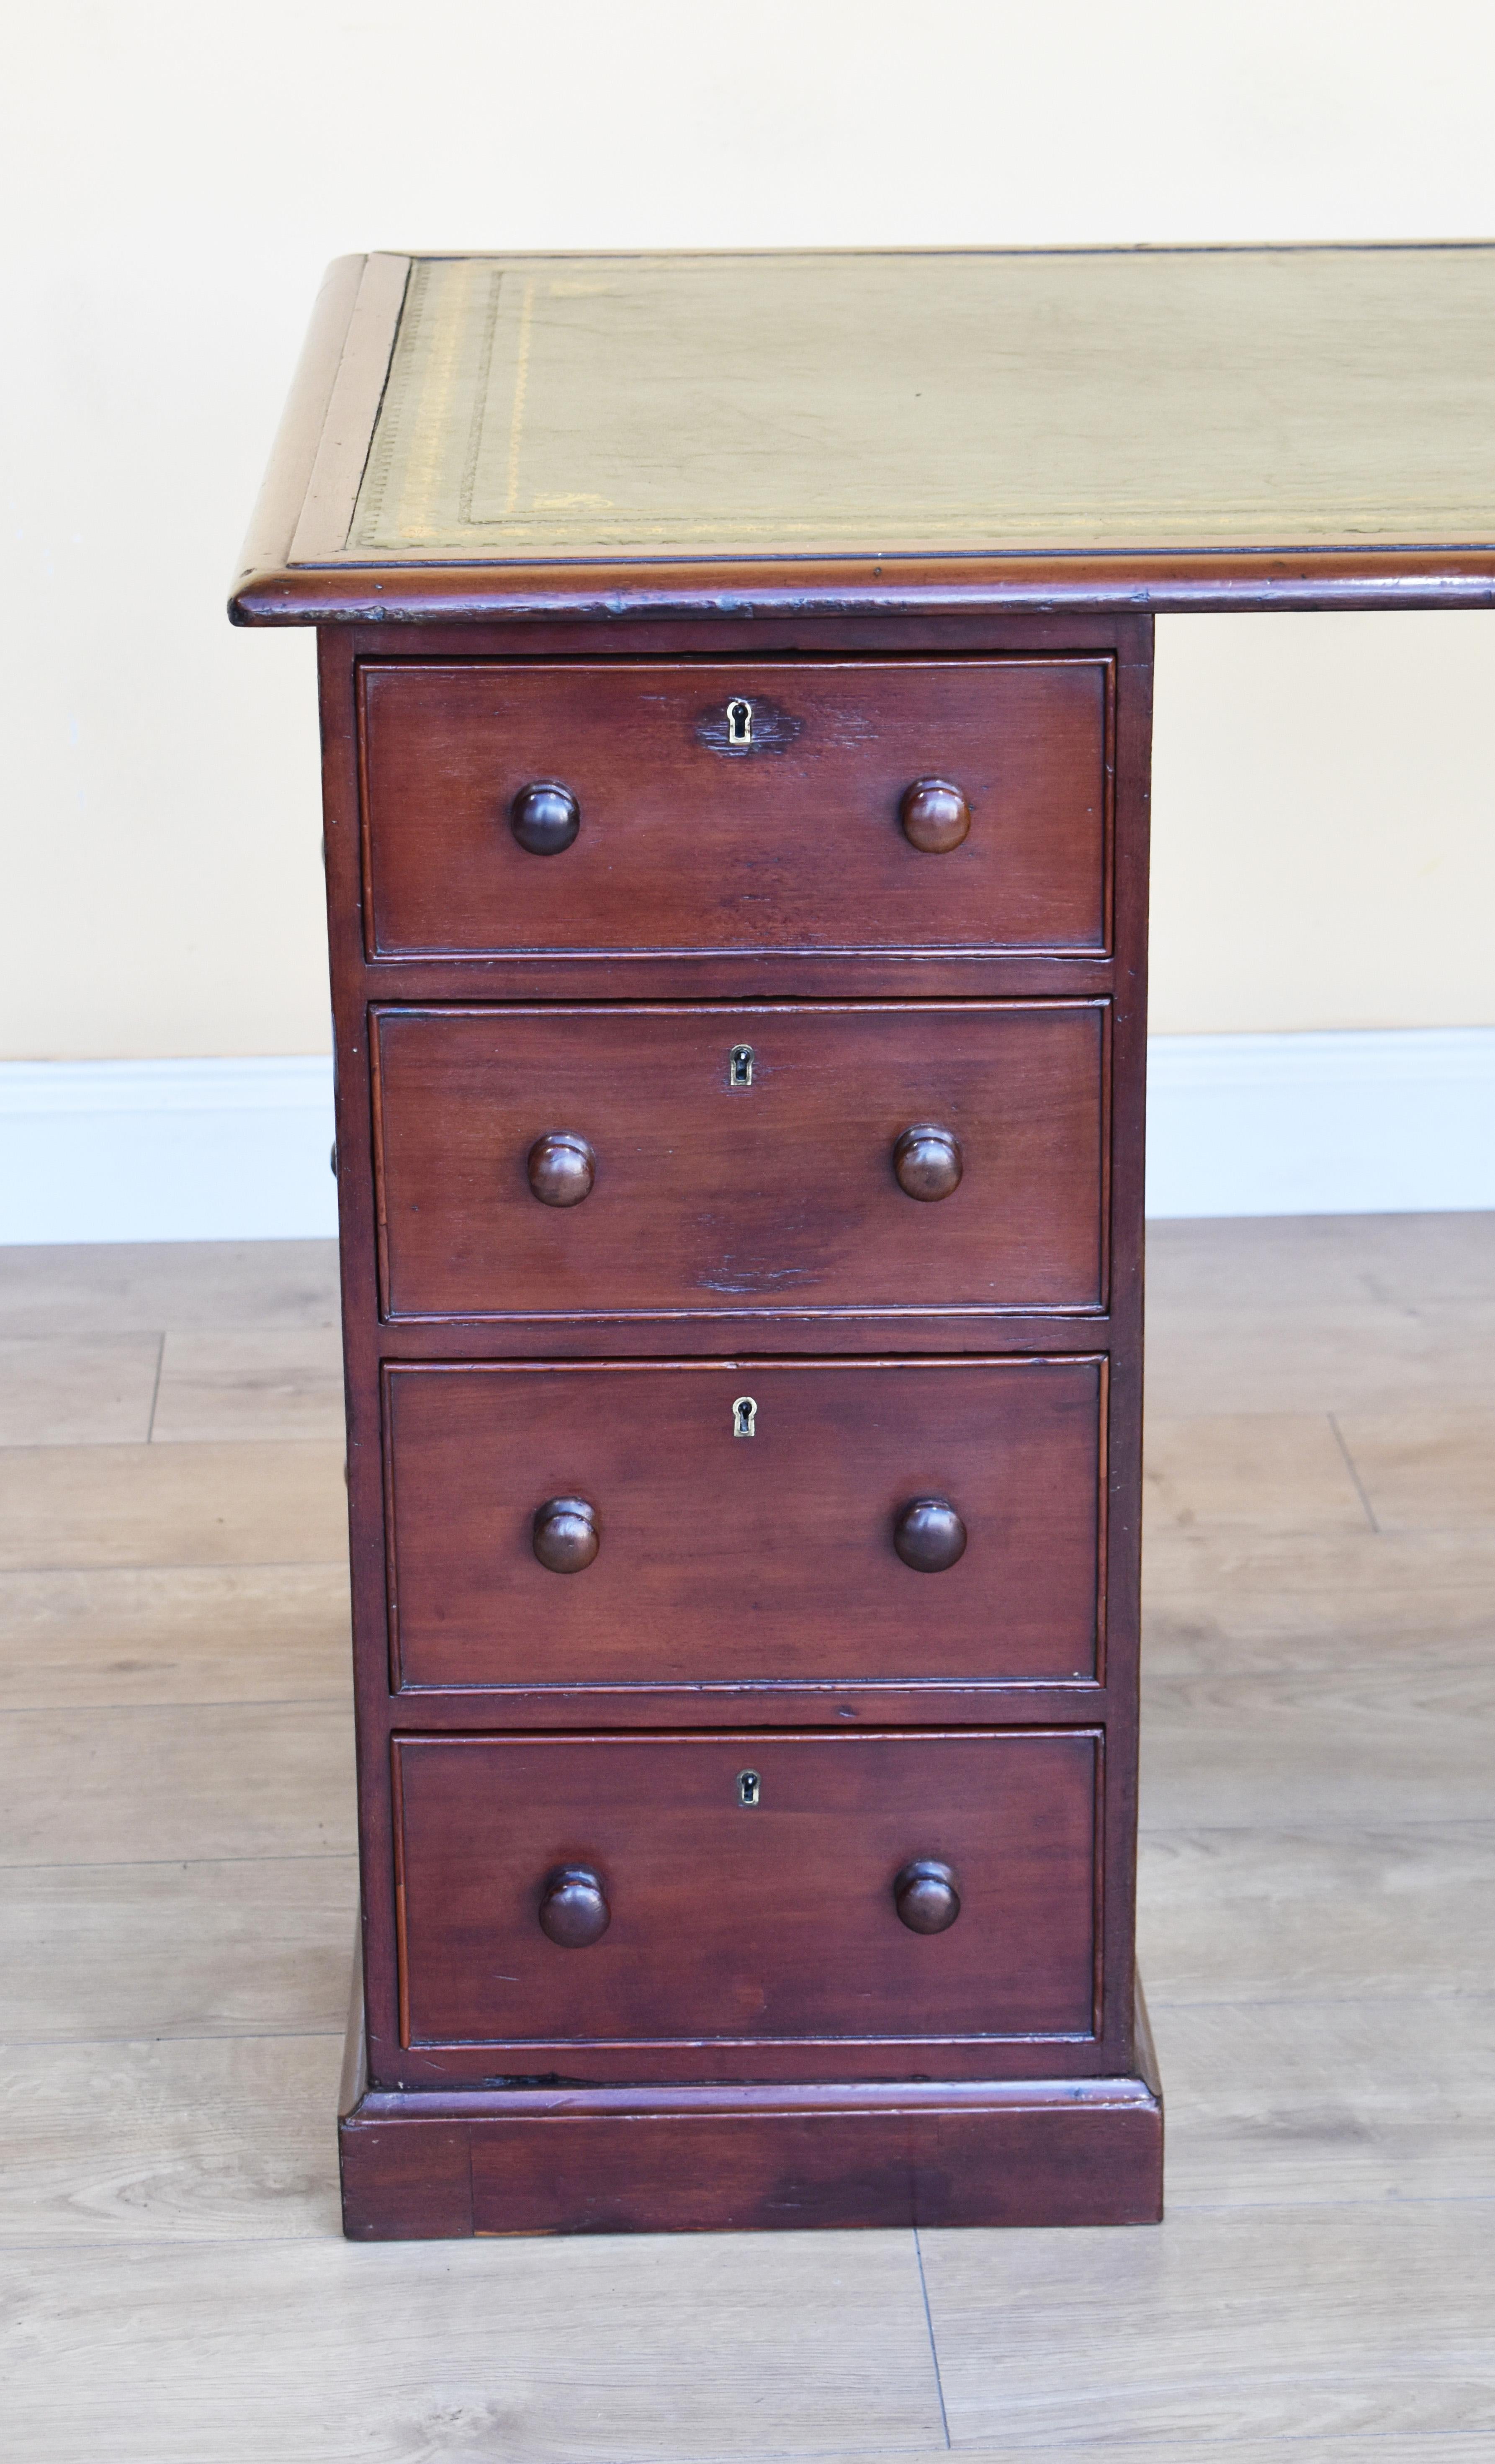 For sale is a good quality unusual George III mahogany pedestal desk. The top is inset with a green leather skiver, decorated with blind and gold tooling as well as gold corner and centre motifs. The top screws onto two pedestals, each having an